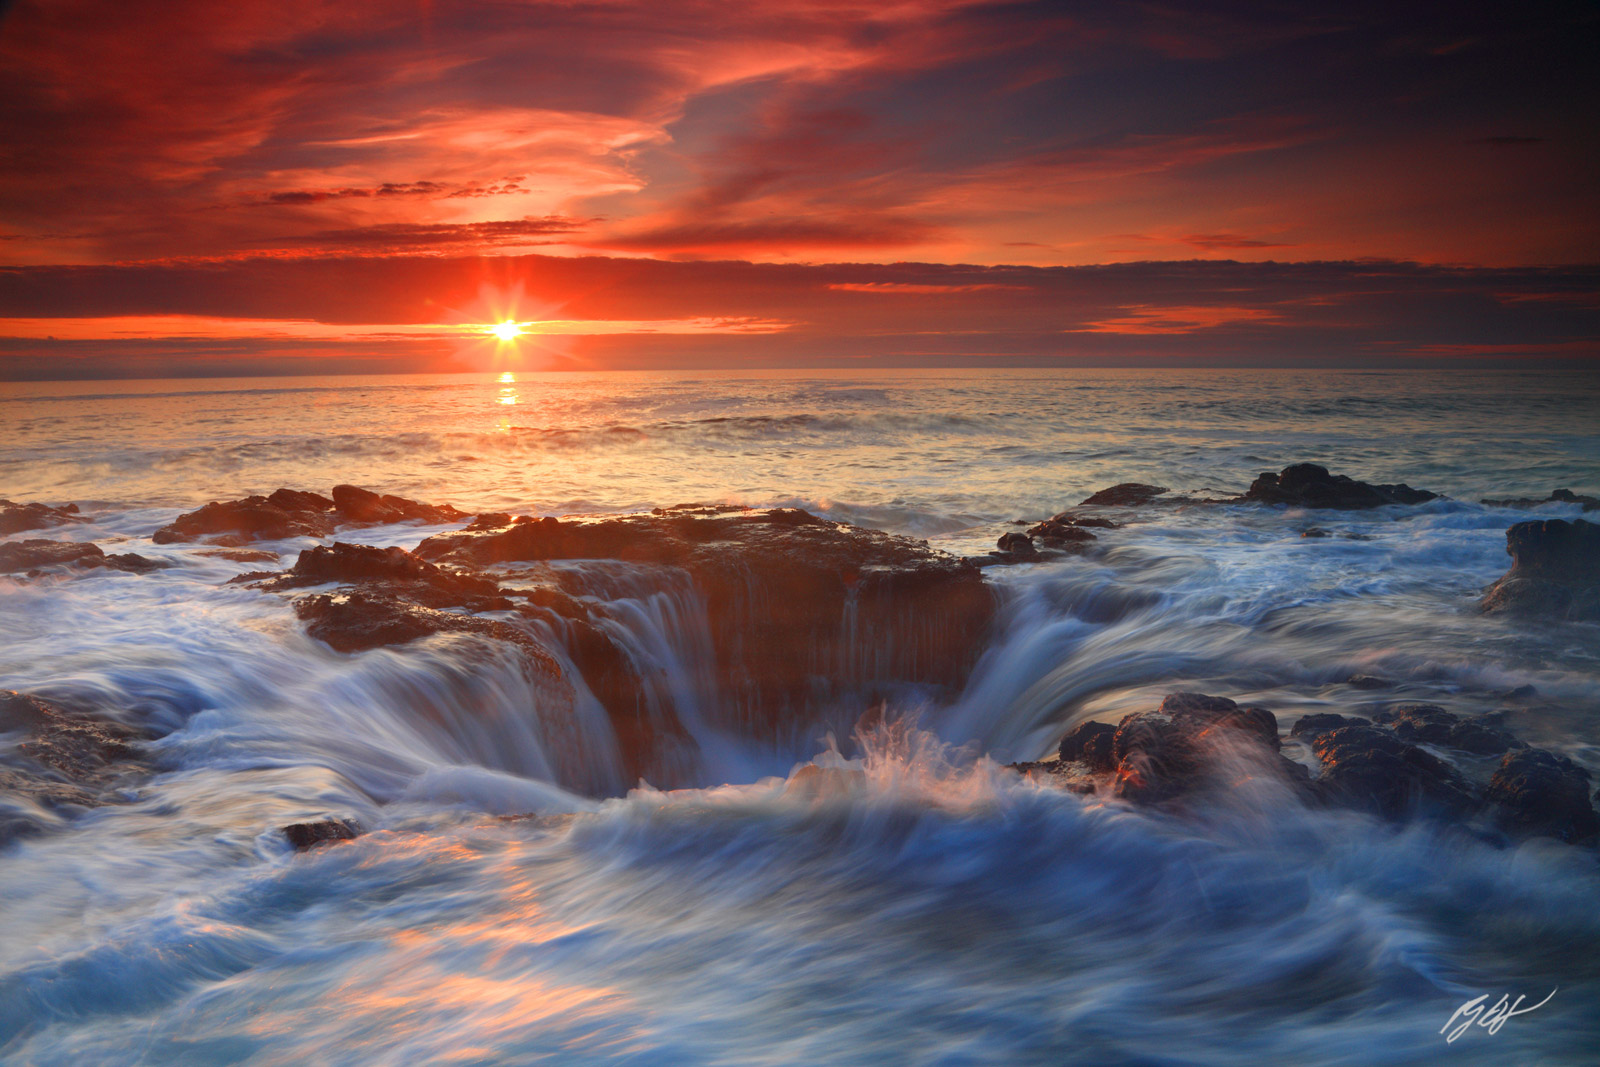 Sunset and Thor's Well in Cape Perpetua on the Oregon Coast